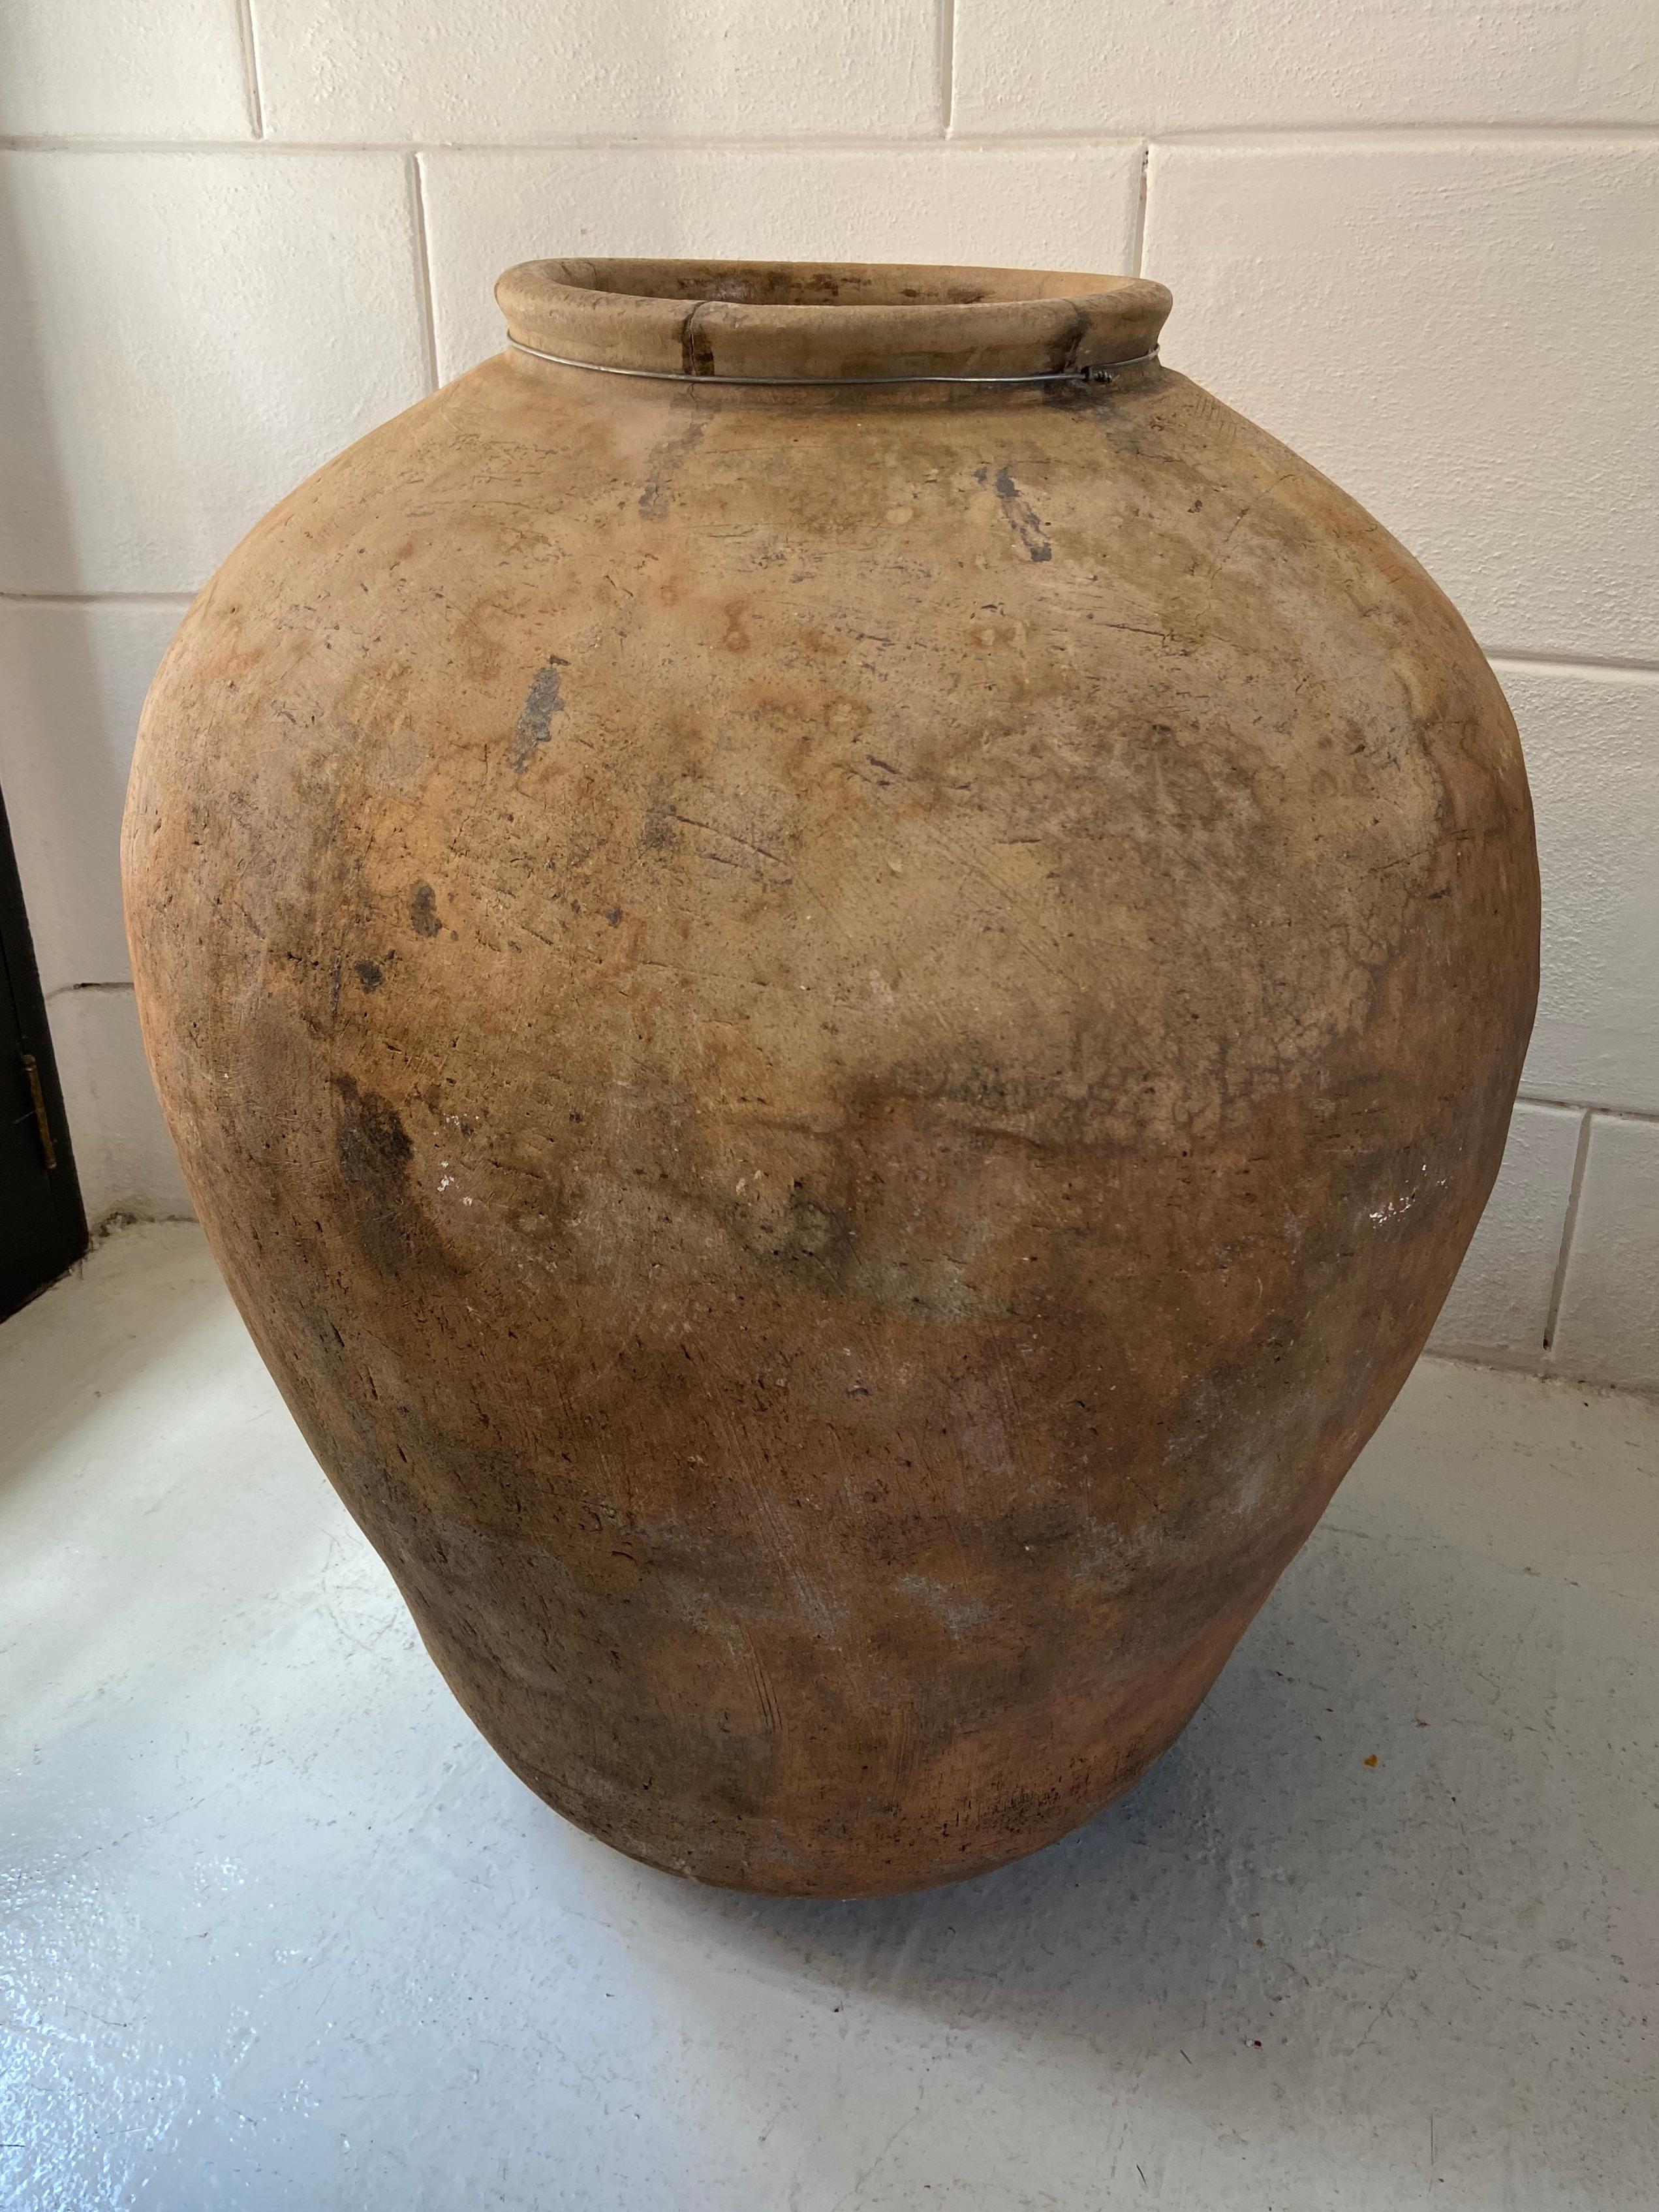 This item is a large early 20th century terracotta pot from Juchitan, Oaxaca. The jar was once used to store water from nearby rivers. The wide and tall form is characteristic of the lower Juchitan region. These massive pots are no longer produced